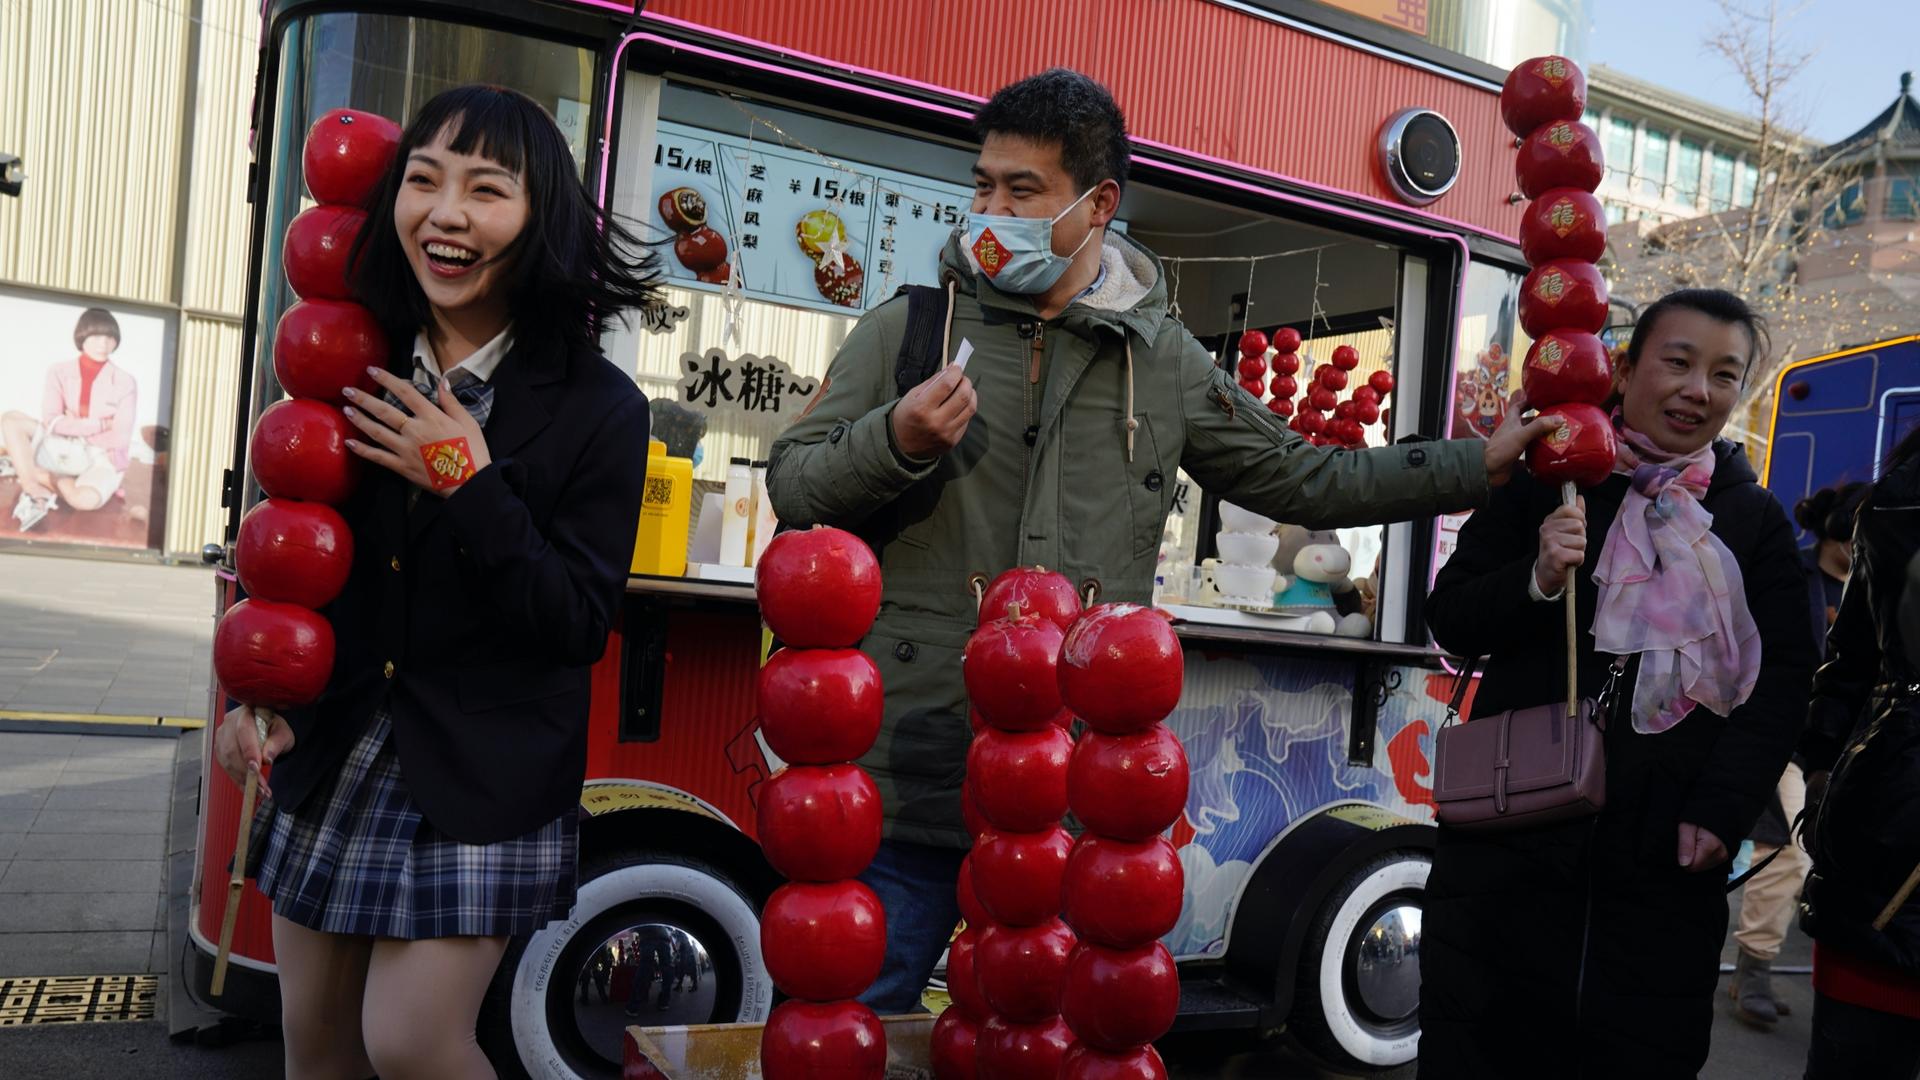 A Chinese woman reacts as she holds a giant replica of candy haw, a popular Beijing snack, at a street stall near Wangfujing on the fourth day of the Lunar Chinese New Year in Beijing on Feb. 15, 2021.